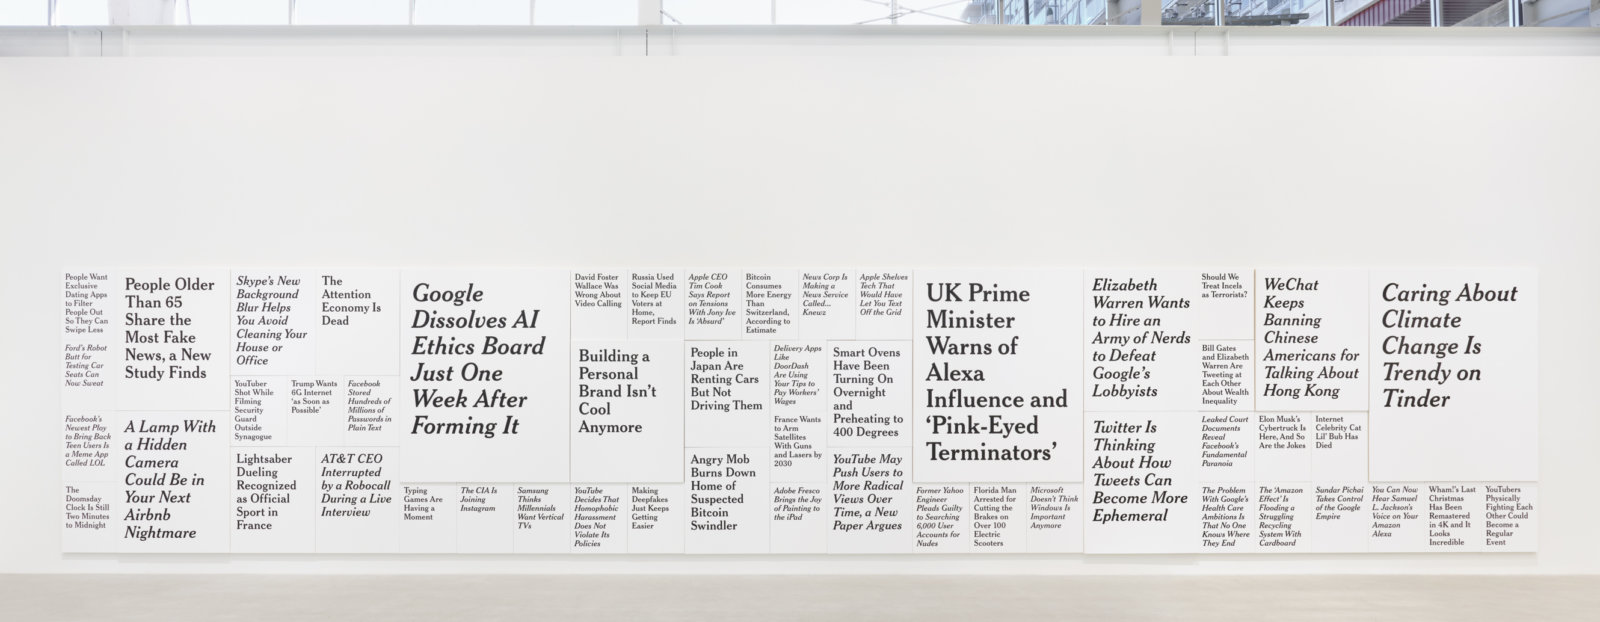 Ron Terada, TL; DR, 2019–2020, 52 paintings, acrylic on canvas, 120 x 624 in. (305 x 1585 cm)